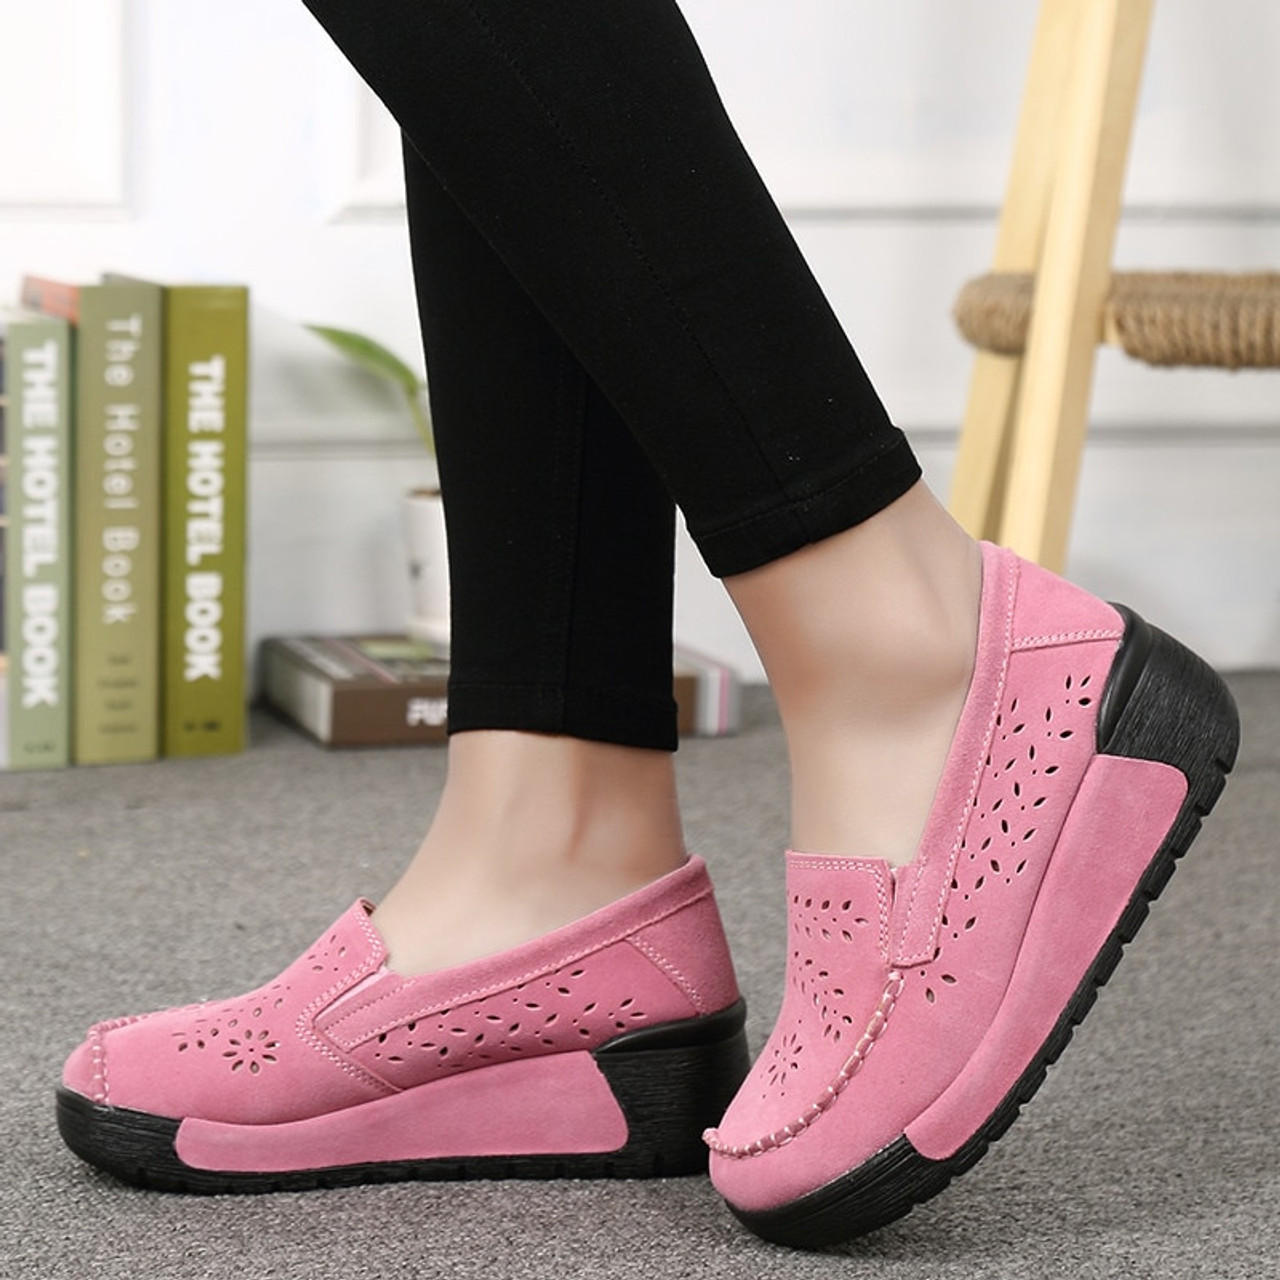 PINSEN Summer Women Casual Shoes Suede Leather Slip-On Women Flats Platform  Shoes Woman Moccasins Loafers Shoes chaussures femme 